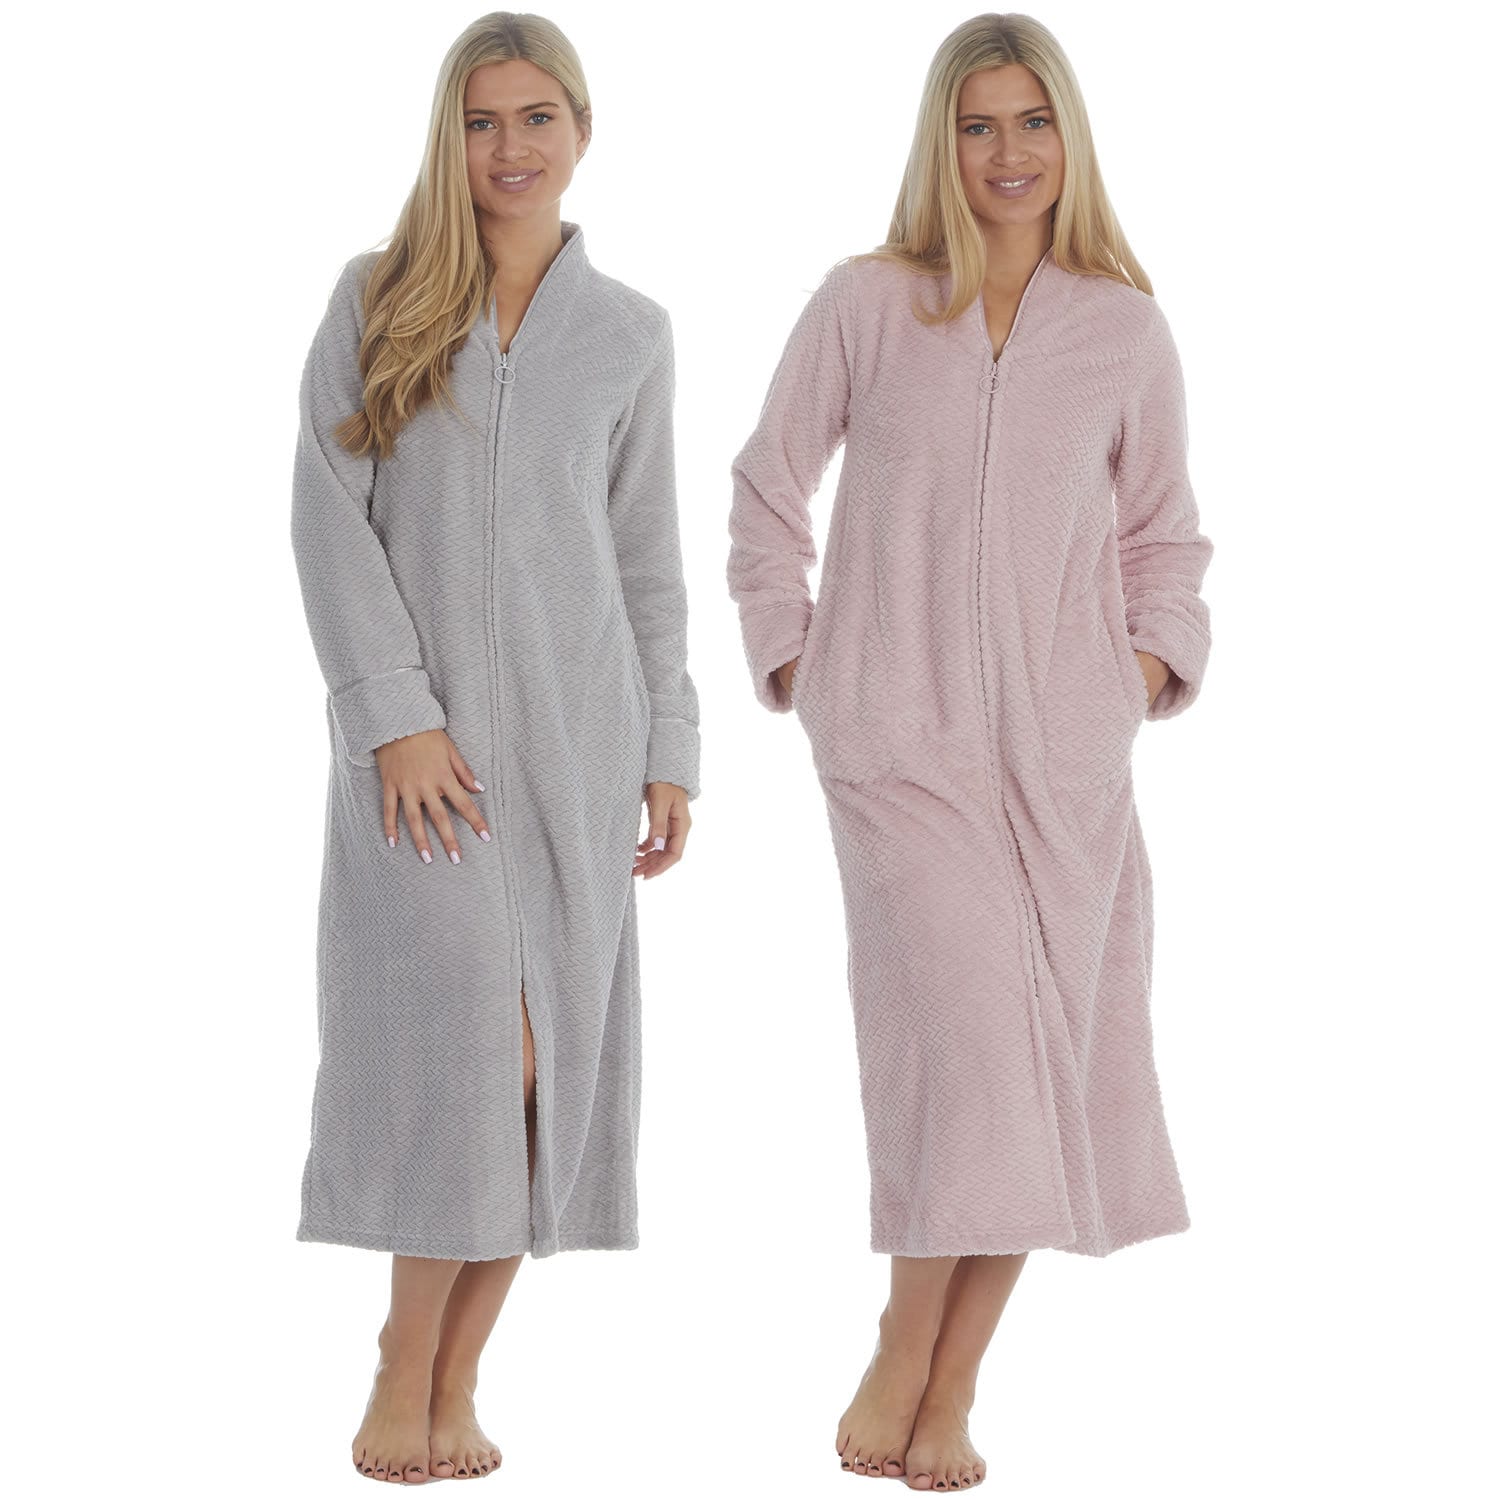 INSIGNIA Ladies Zip Tradional Dressing Gown Pink Zip Up 1214   Amazoncouk Fashion